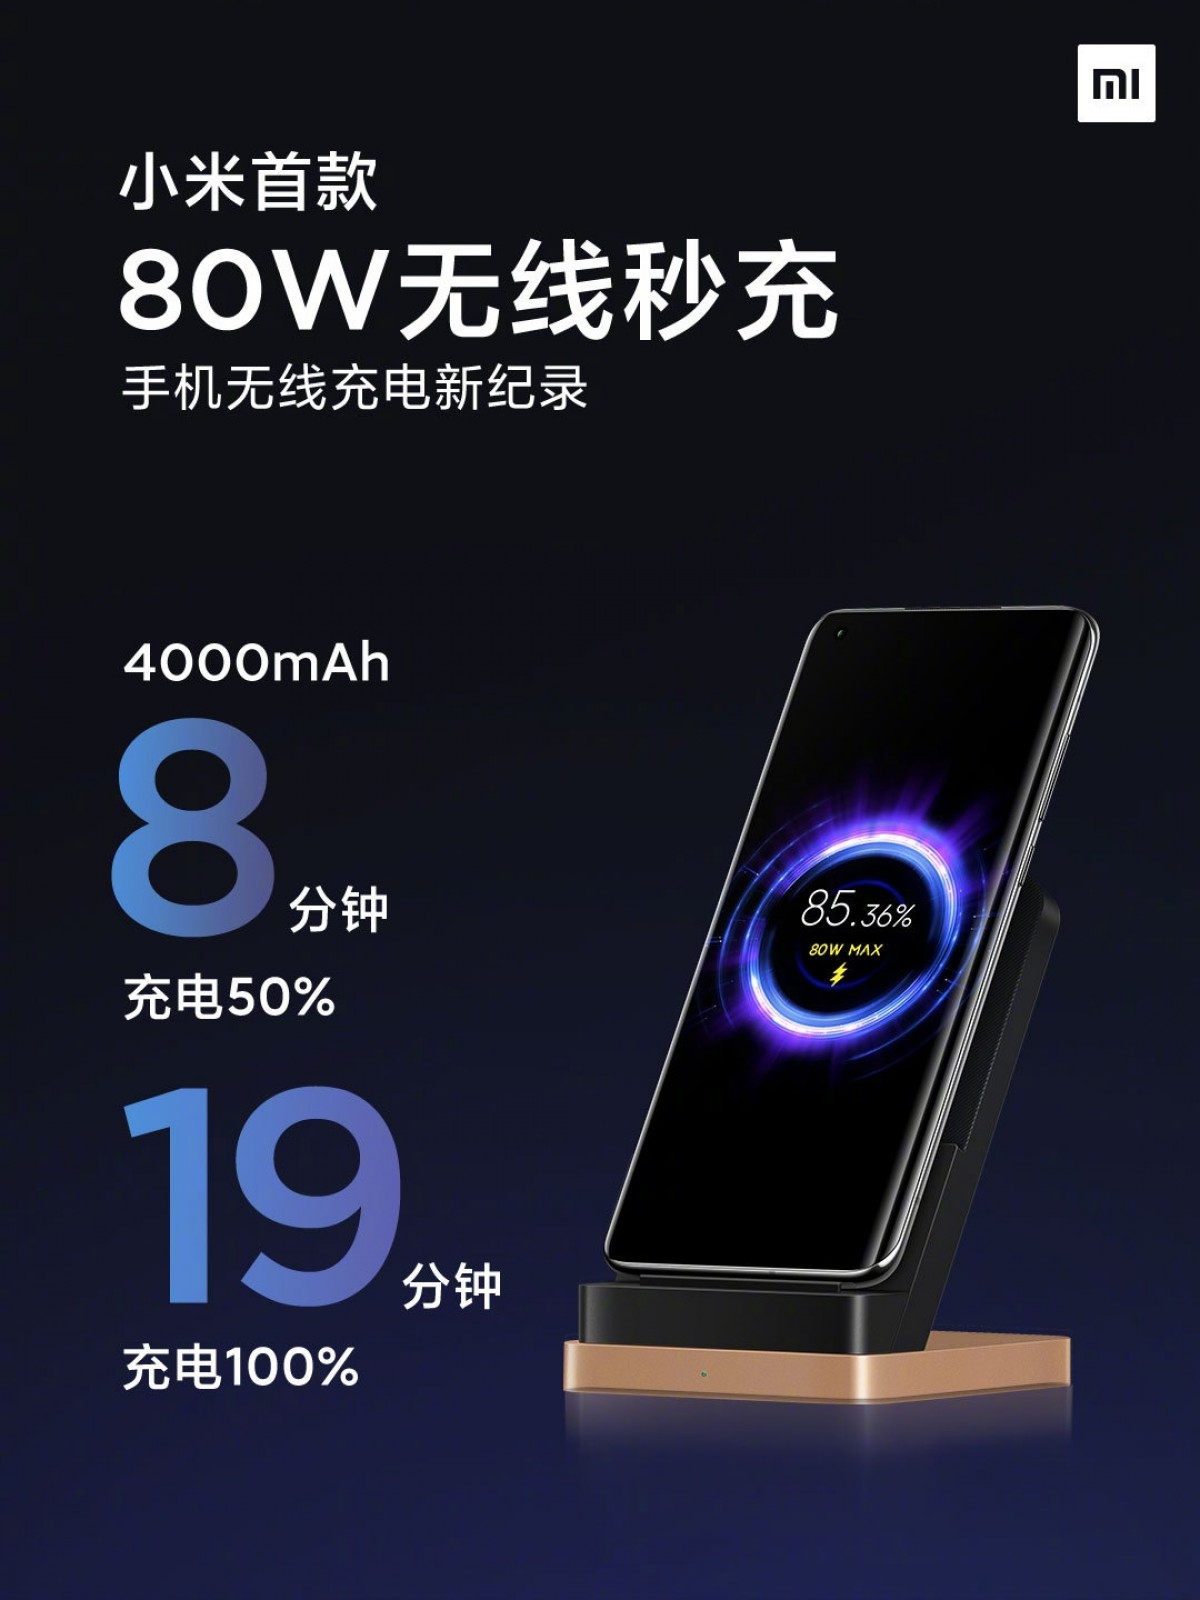 Xiaomi creates 80W wireless charger, tops up a battery in 19 minutes